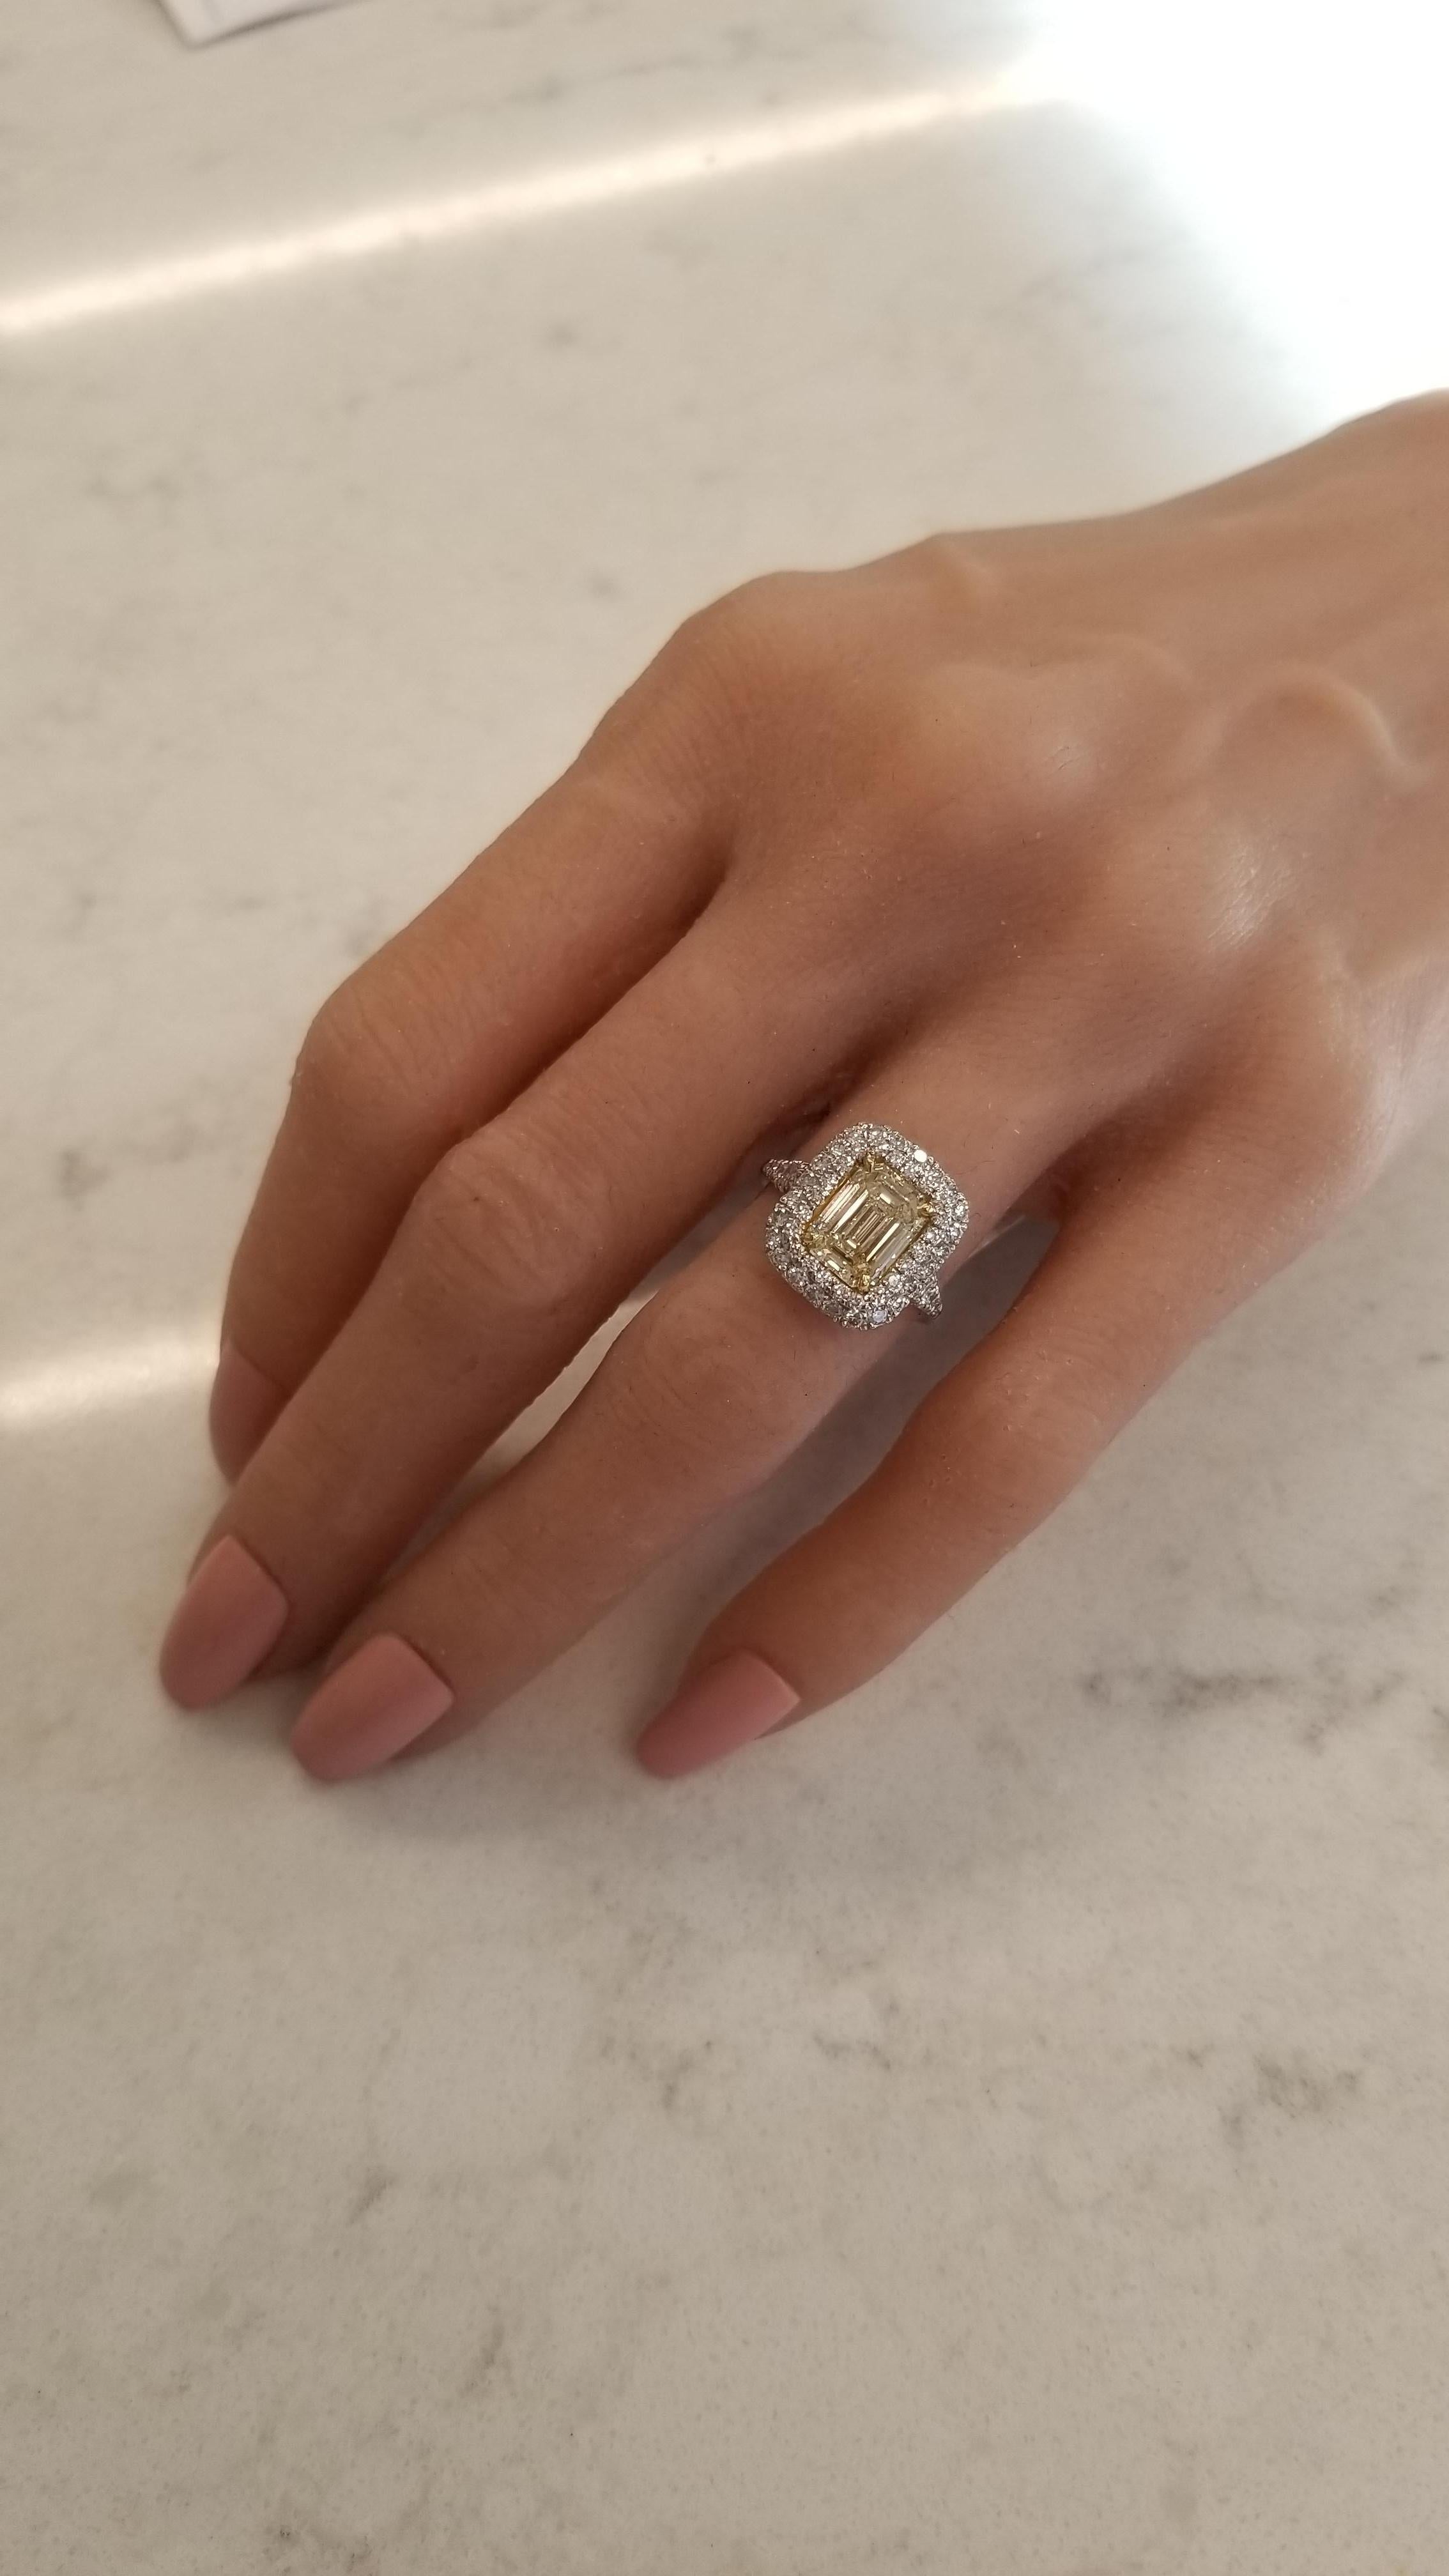 This is a PGS certified emerald cut diamond that is naturally fancy intense yellow. A weight of 2.08 carats and measurements of 8.28-6.65mm in a rich yellow gold accented prong setting, the shape is layed out perfectly. It is very rare to have an